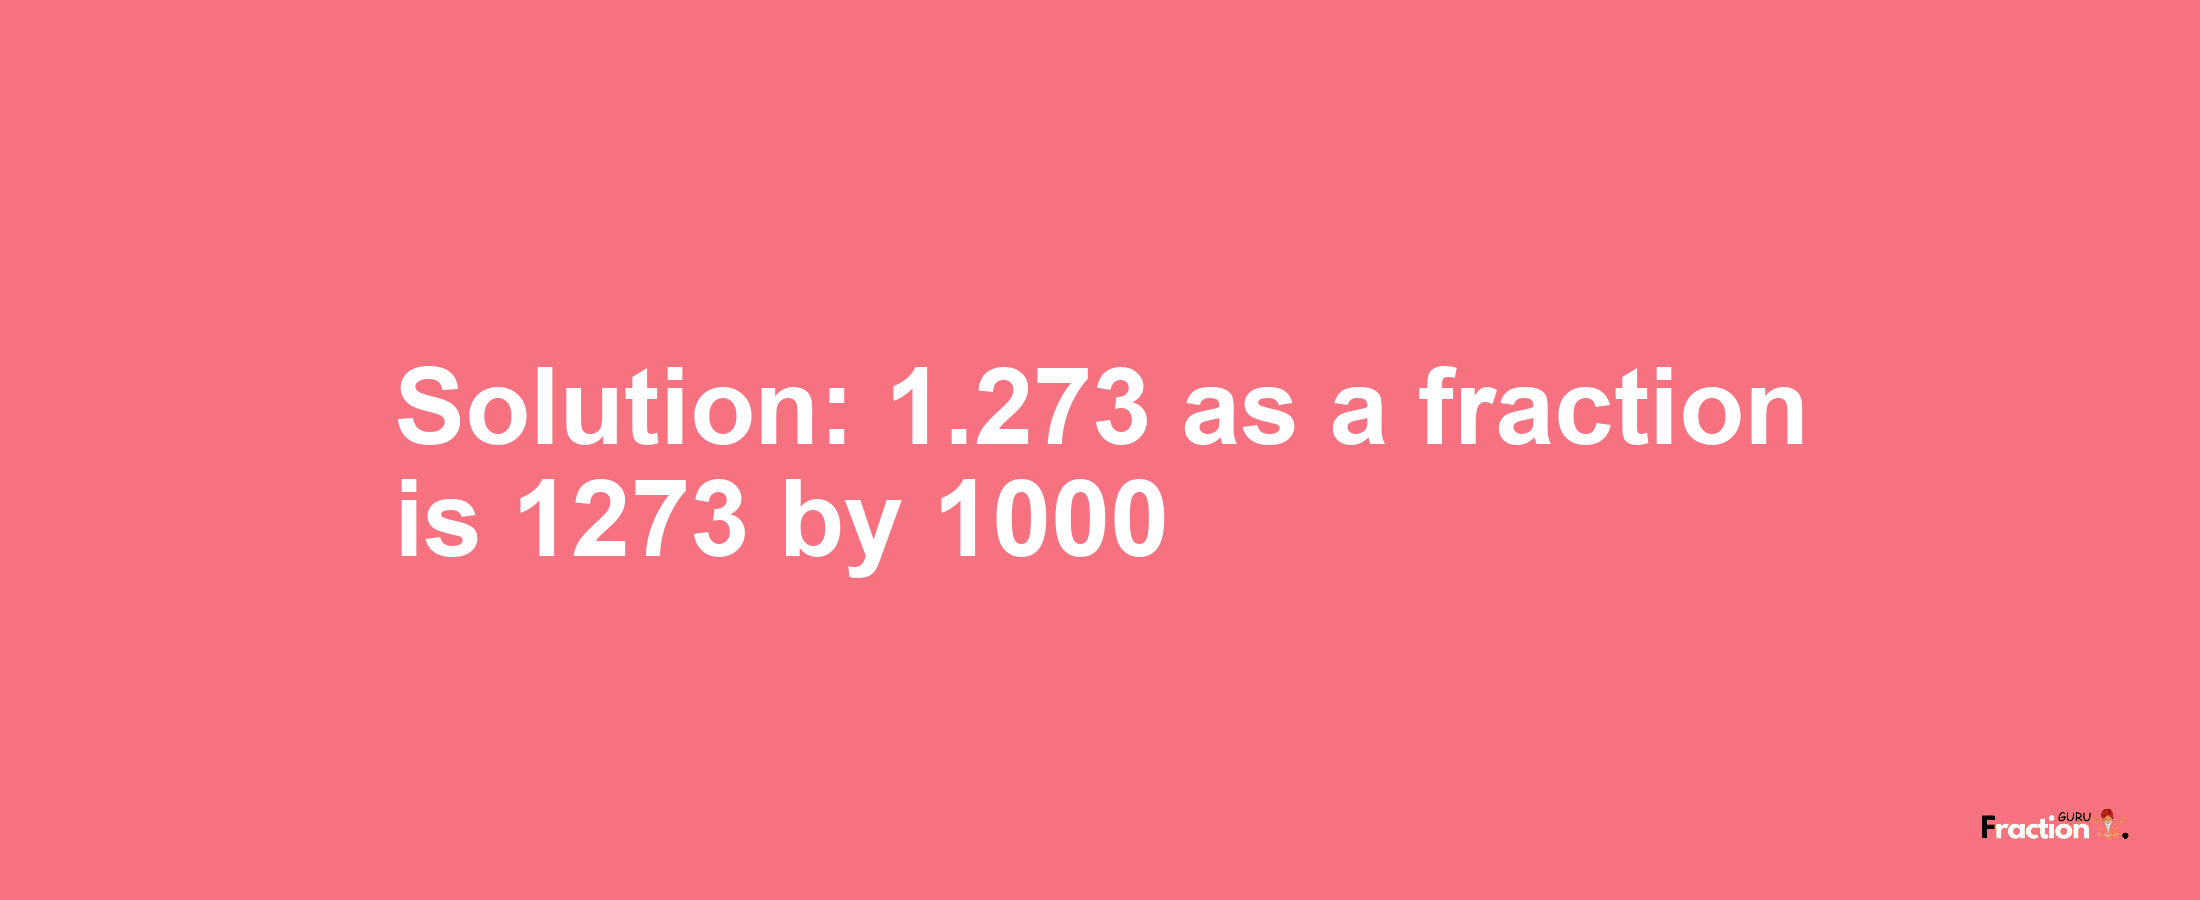 Solution:1.273 as a fraction is 1273/1000